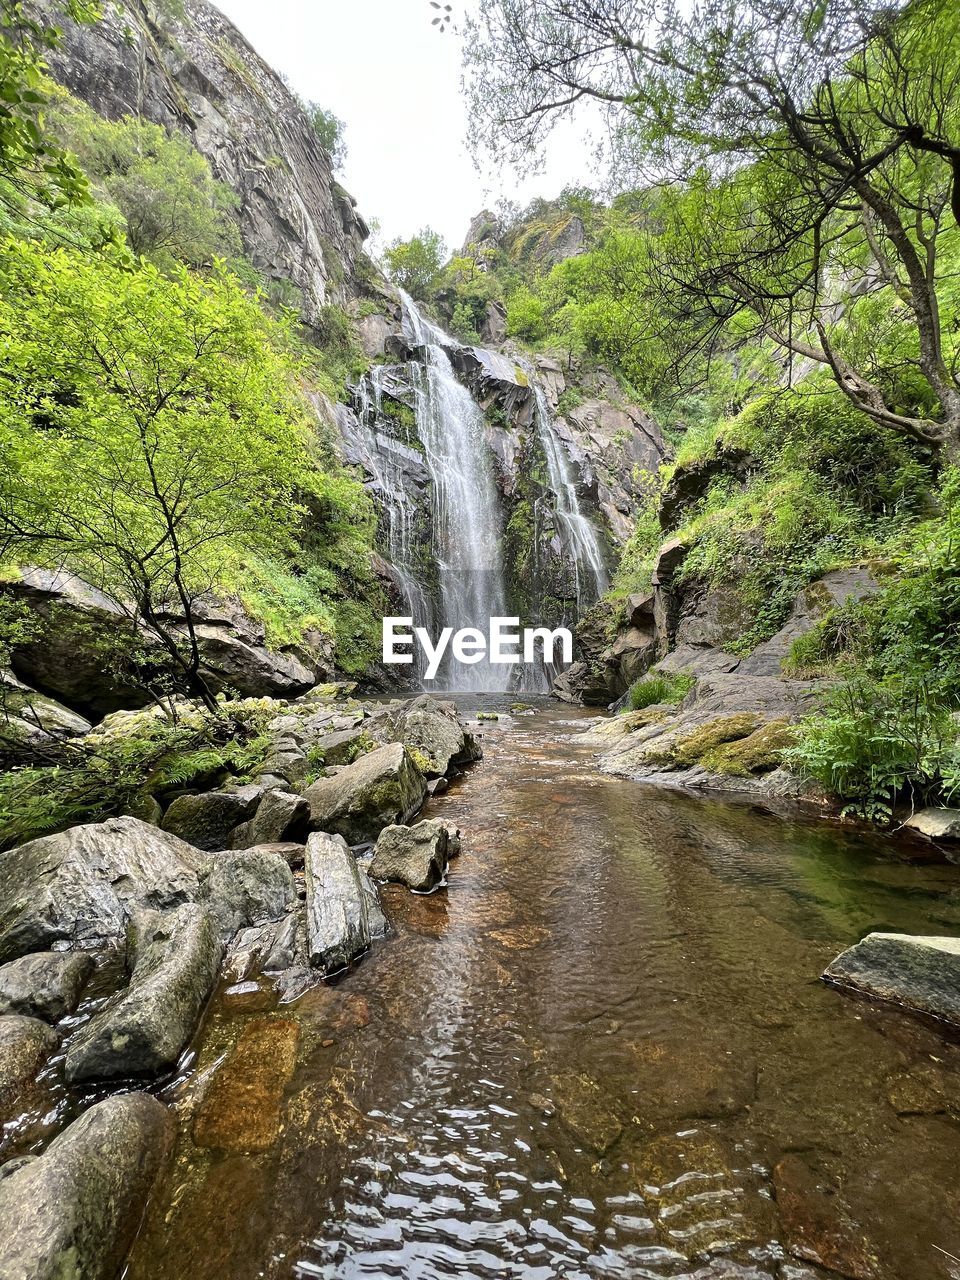 tree, plant, beauty in nature, nature, water, waterfall, scenics - nature, land, rock, no people, forest, day, water feature, green, non-urban scene, environment, growth, tranquility, outdoors, flowing water, wilderness, motion, stream, low angle view, ravine, rock formation, tranquil scene, river, idyllic, moss